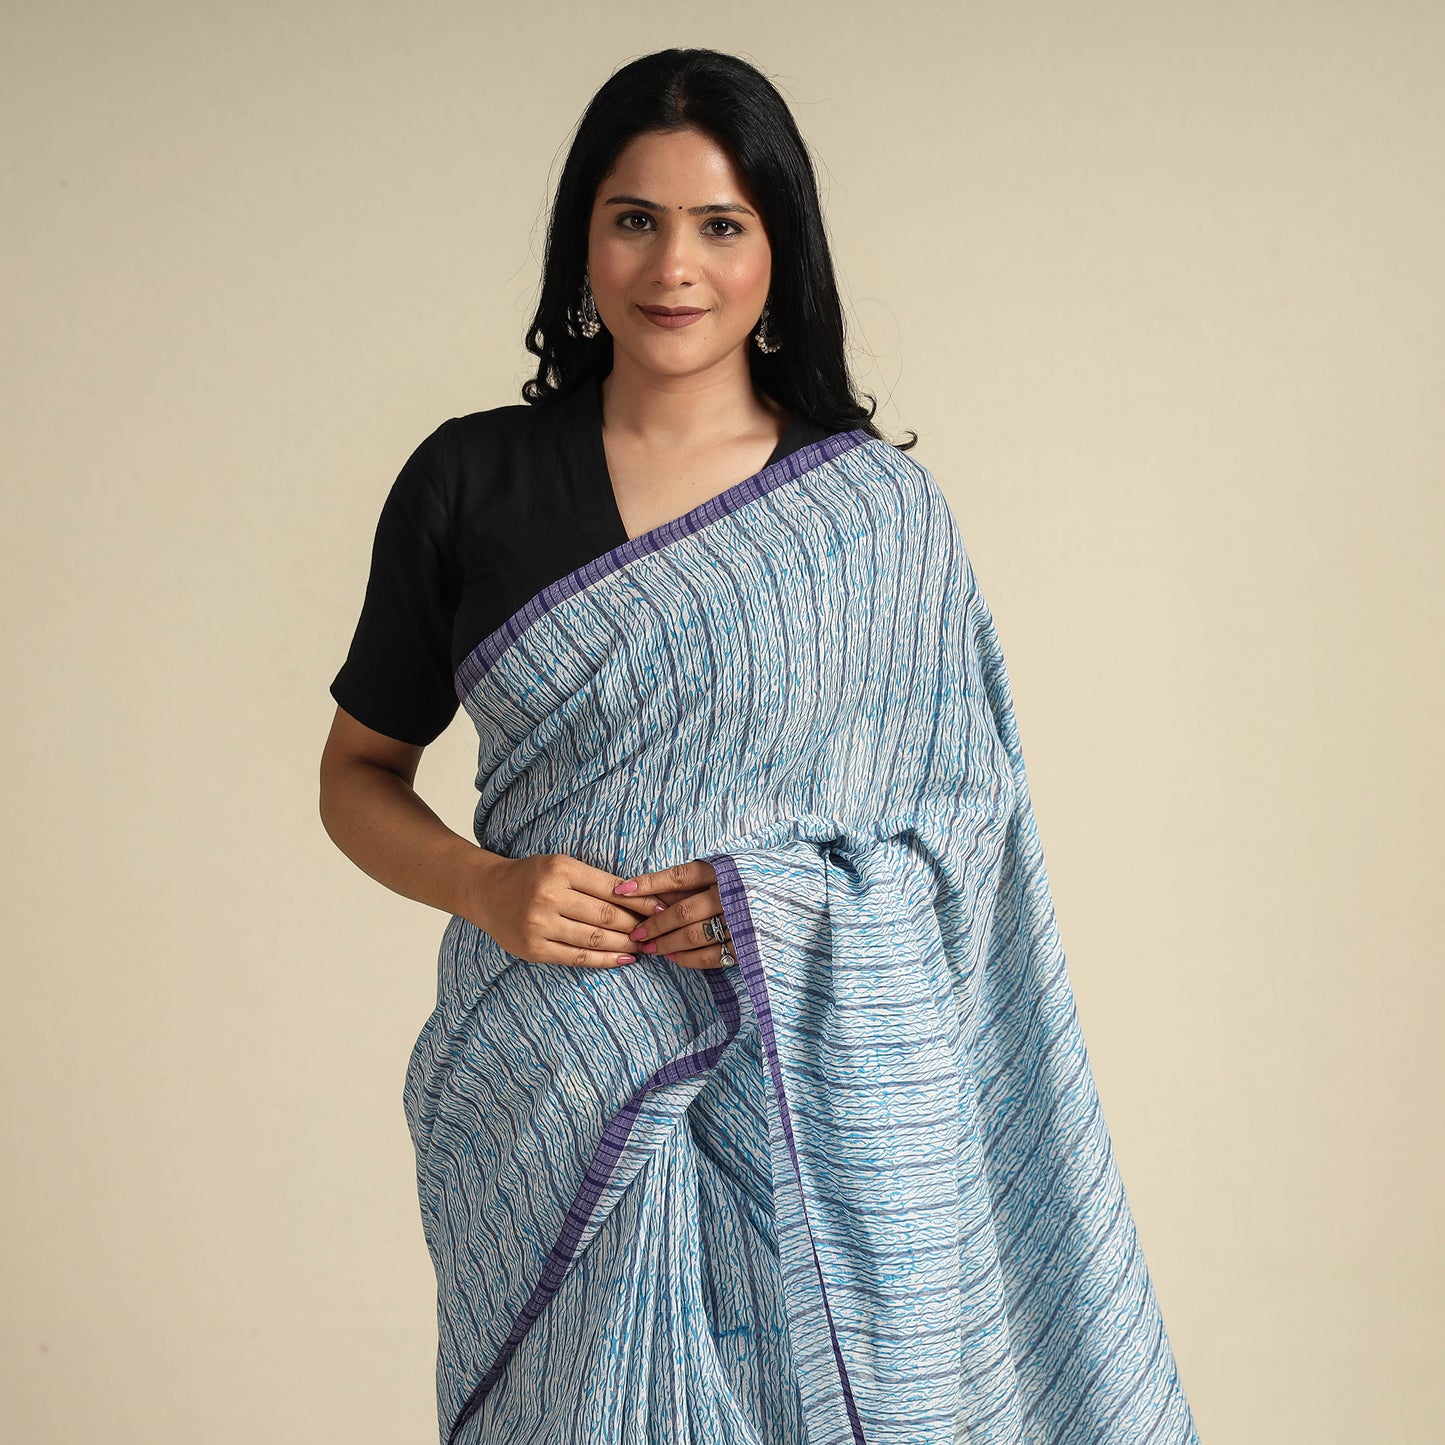 Blue - Bengal Kantha Hand Embroidery Handloom Cotton Saree with Tassels 18